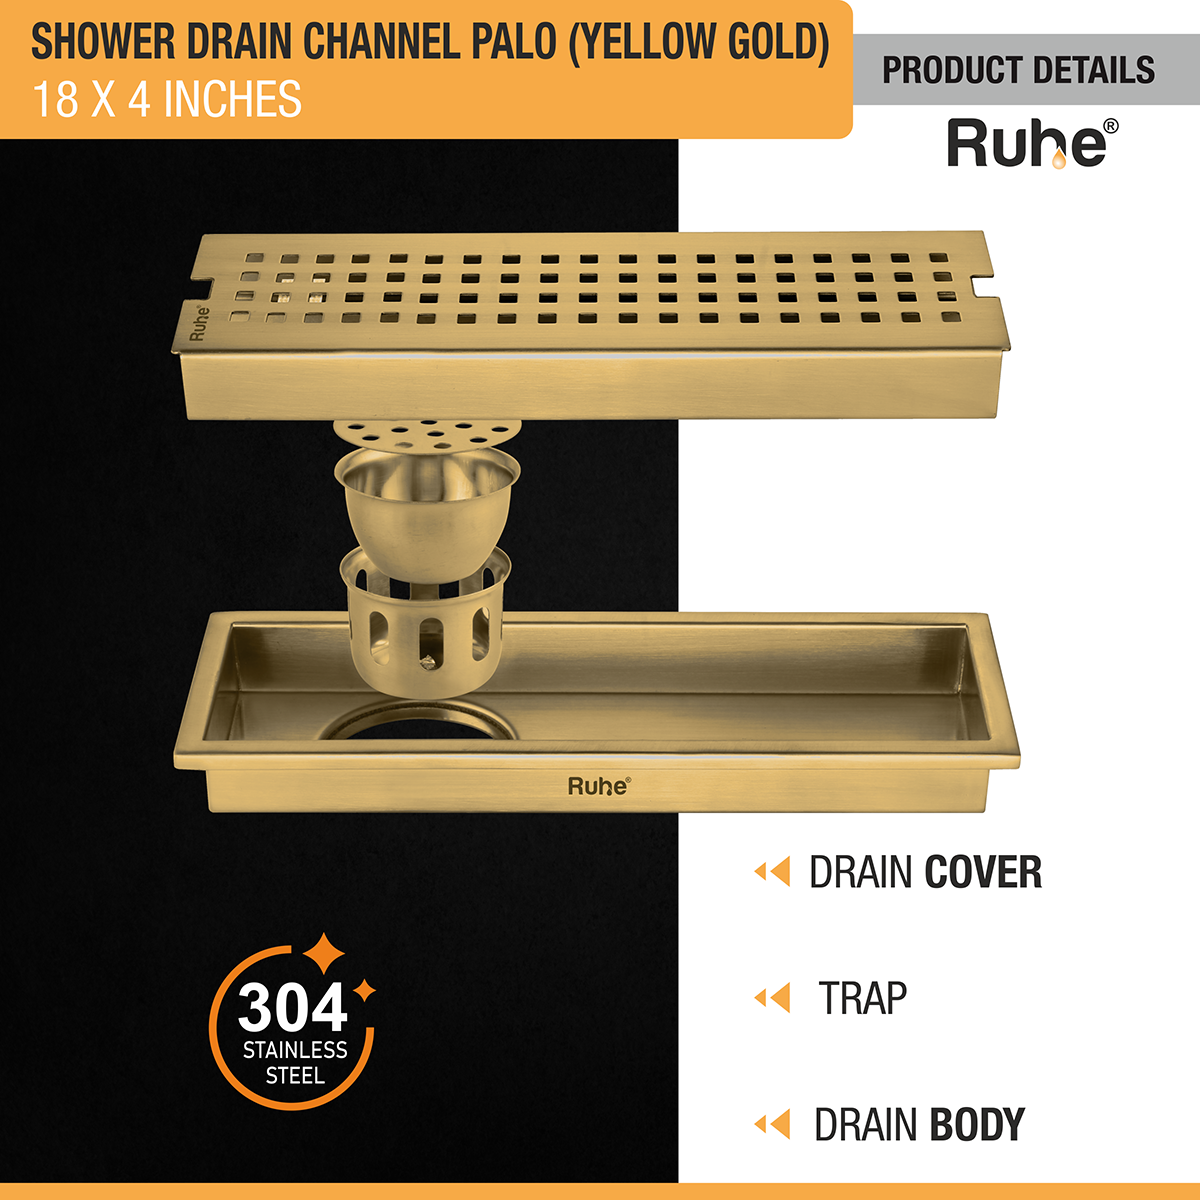 Palo Shower Drain Channel (18 x 4 Inches) YELLOW GOLD product details